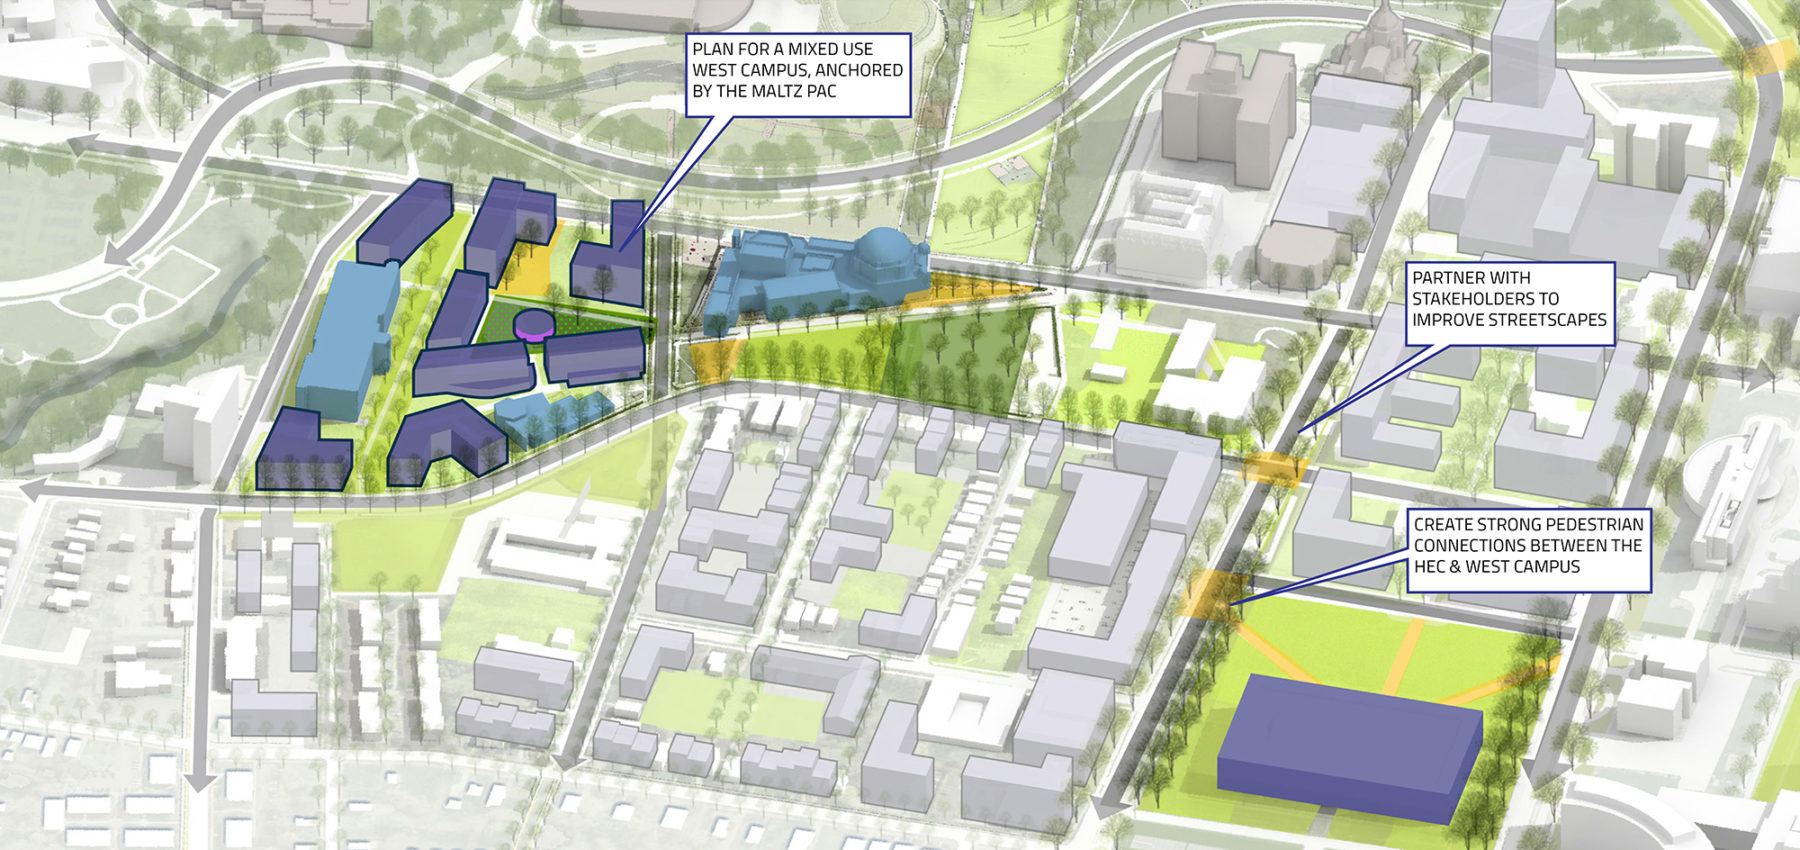 Aerial axon of a campus district with callouts for proposed improvements